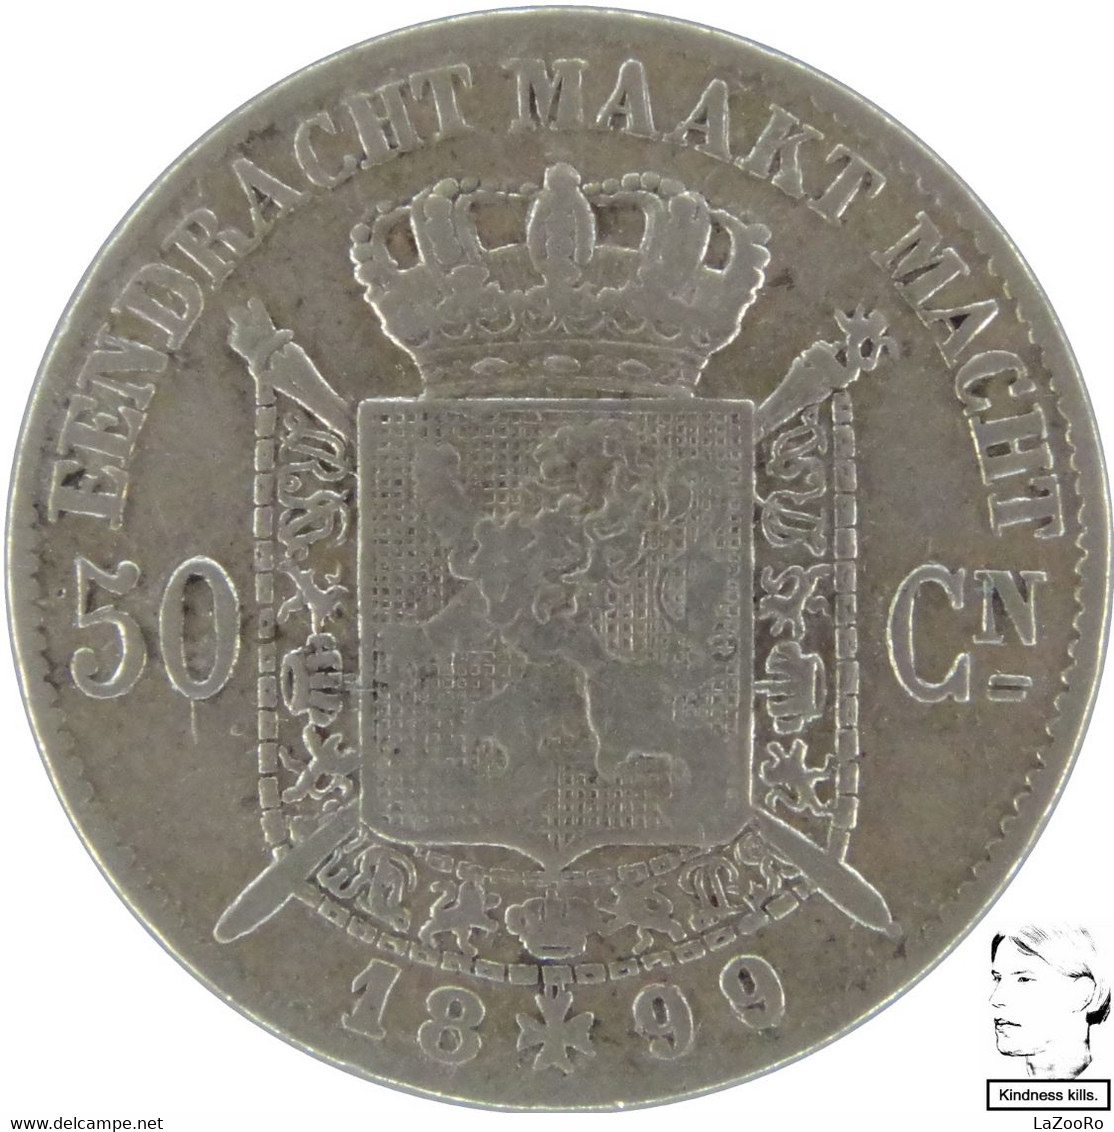 LaZooRo: Belgium 50 Centimes 1899/86 VF / XF Not In Krause - Silver - 50 Centimes